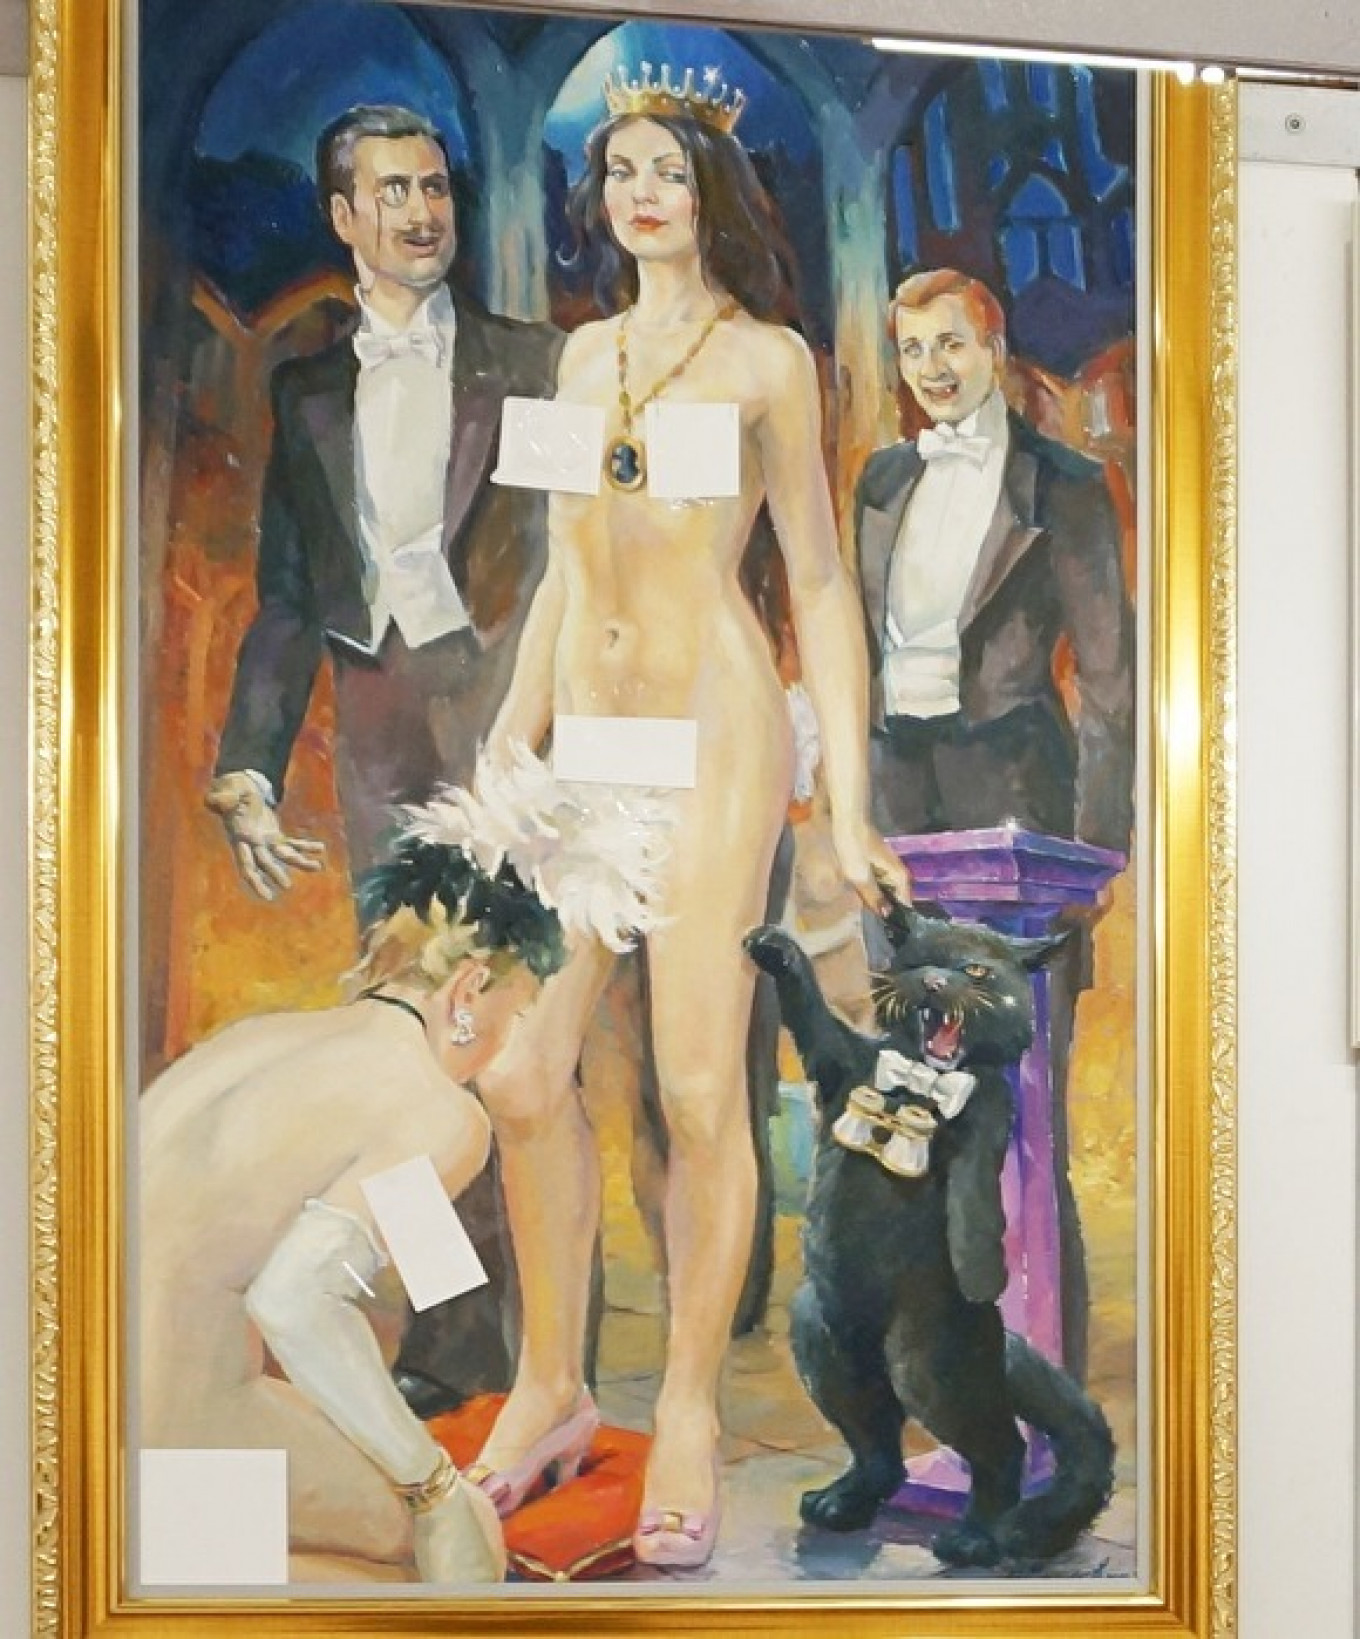 Russian Gallery Puts Stickers Over Nude Art - The Moscow Times